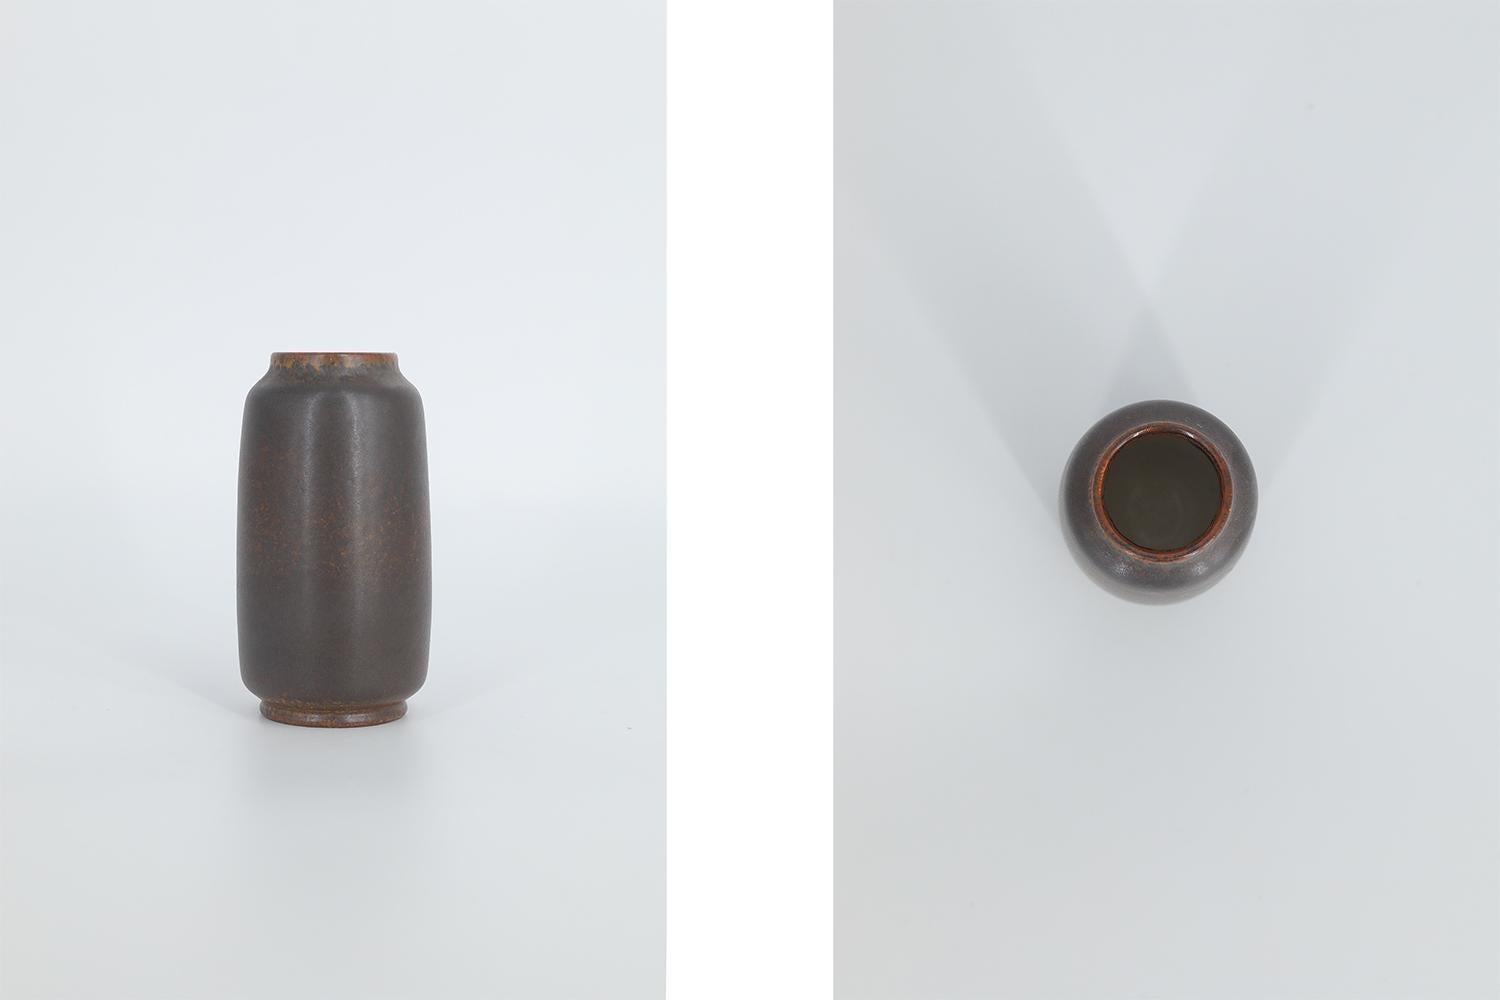 This miniature, collectible stoneware vase was designed by Gunnar Borg for the Swedish manufacture Höganäs Keramik during the 1960s. Handmade by a Master, with the utmost care and attention to details. The vase is colored dark chocolate in an